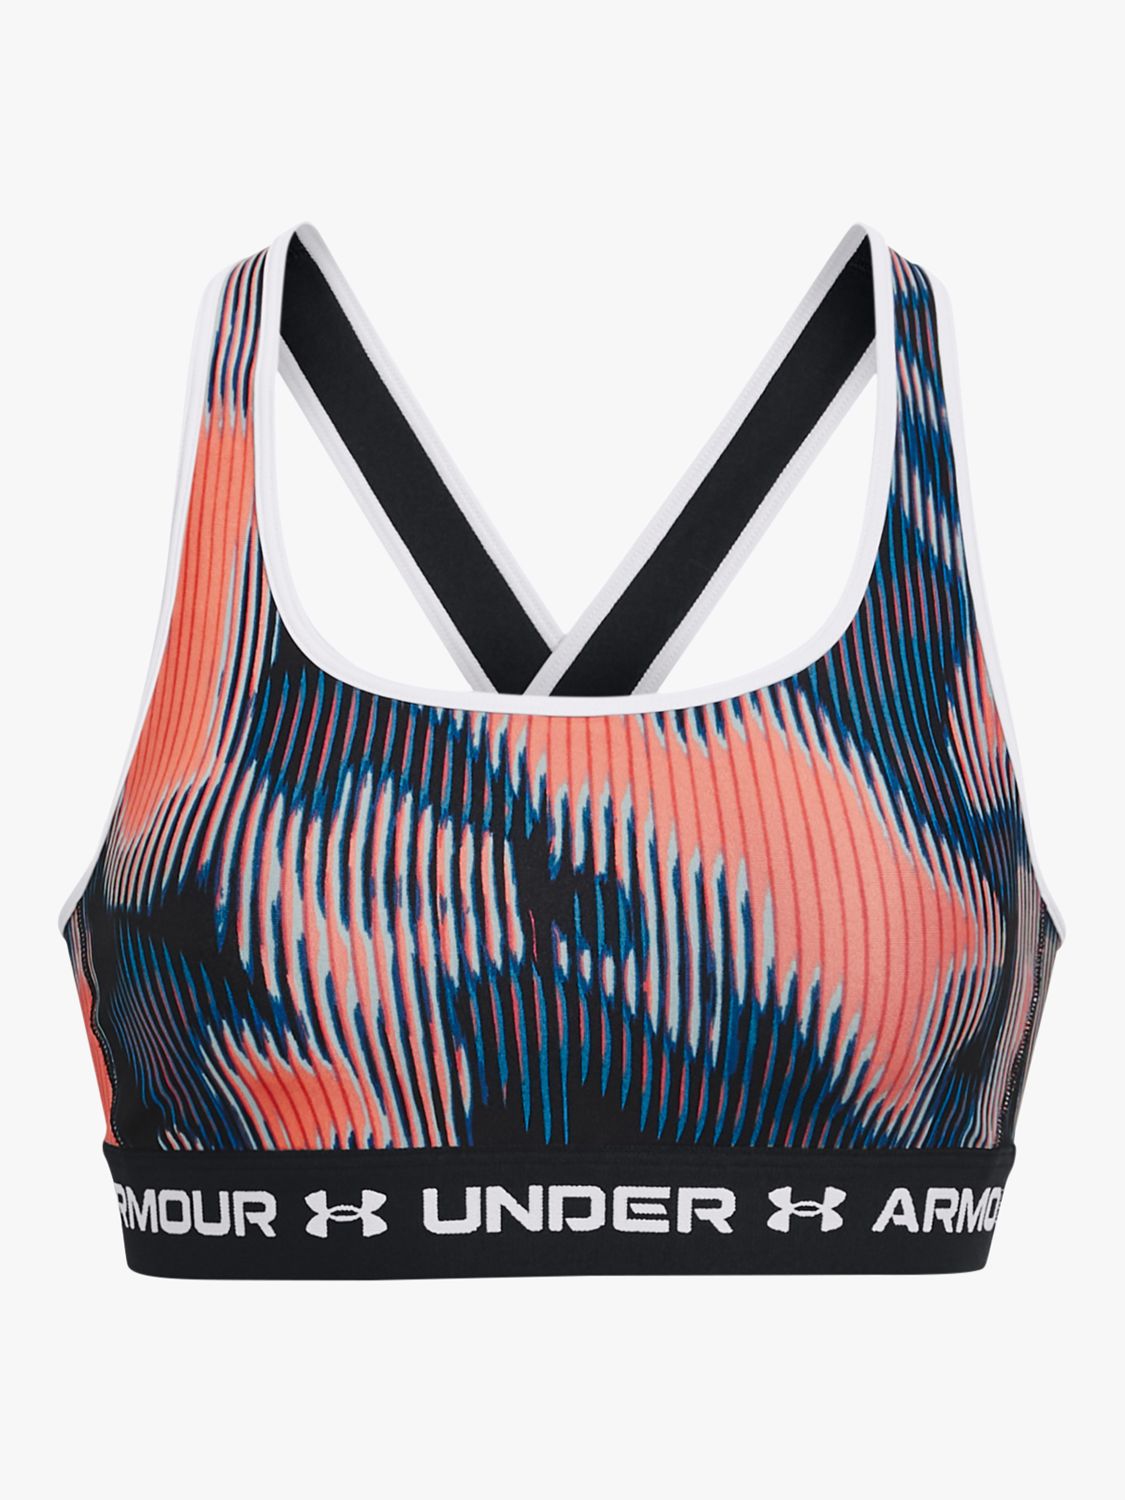 Women's Crossover Sports Bra - Reef Teal – ALC // ACTIV Lifestyle Co